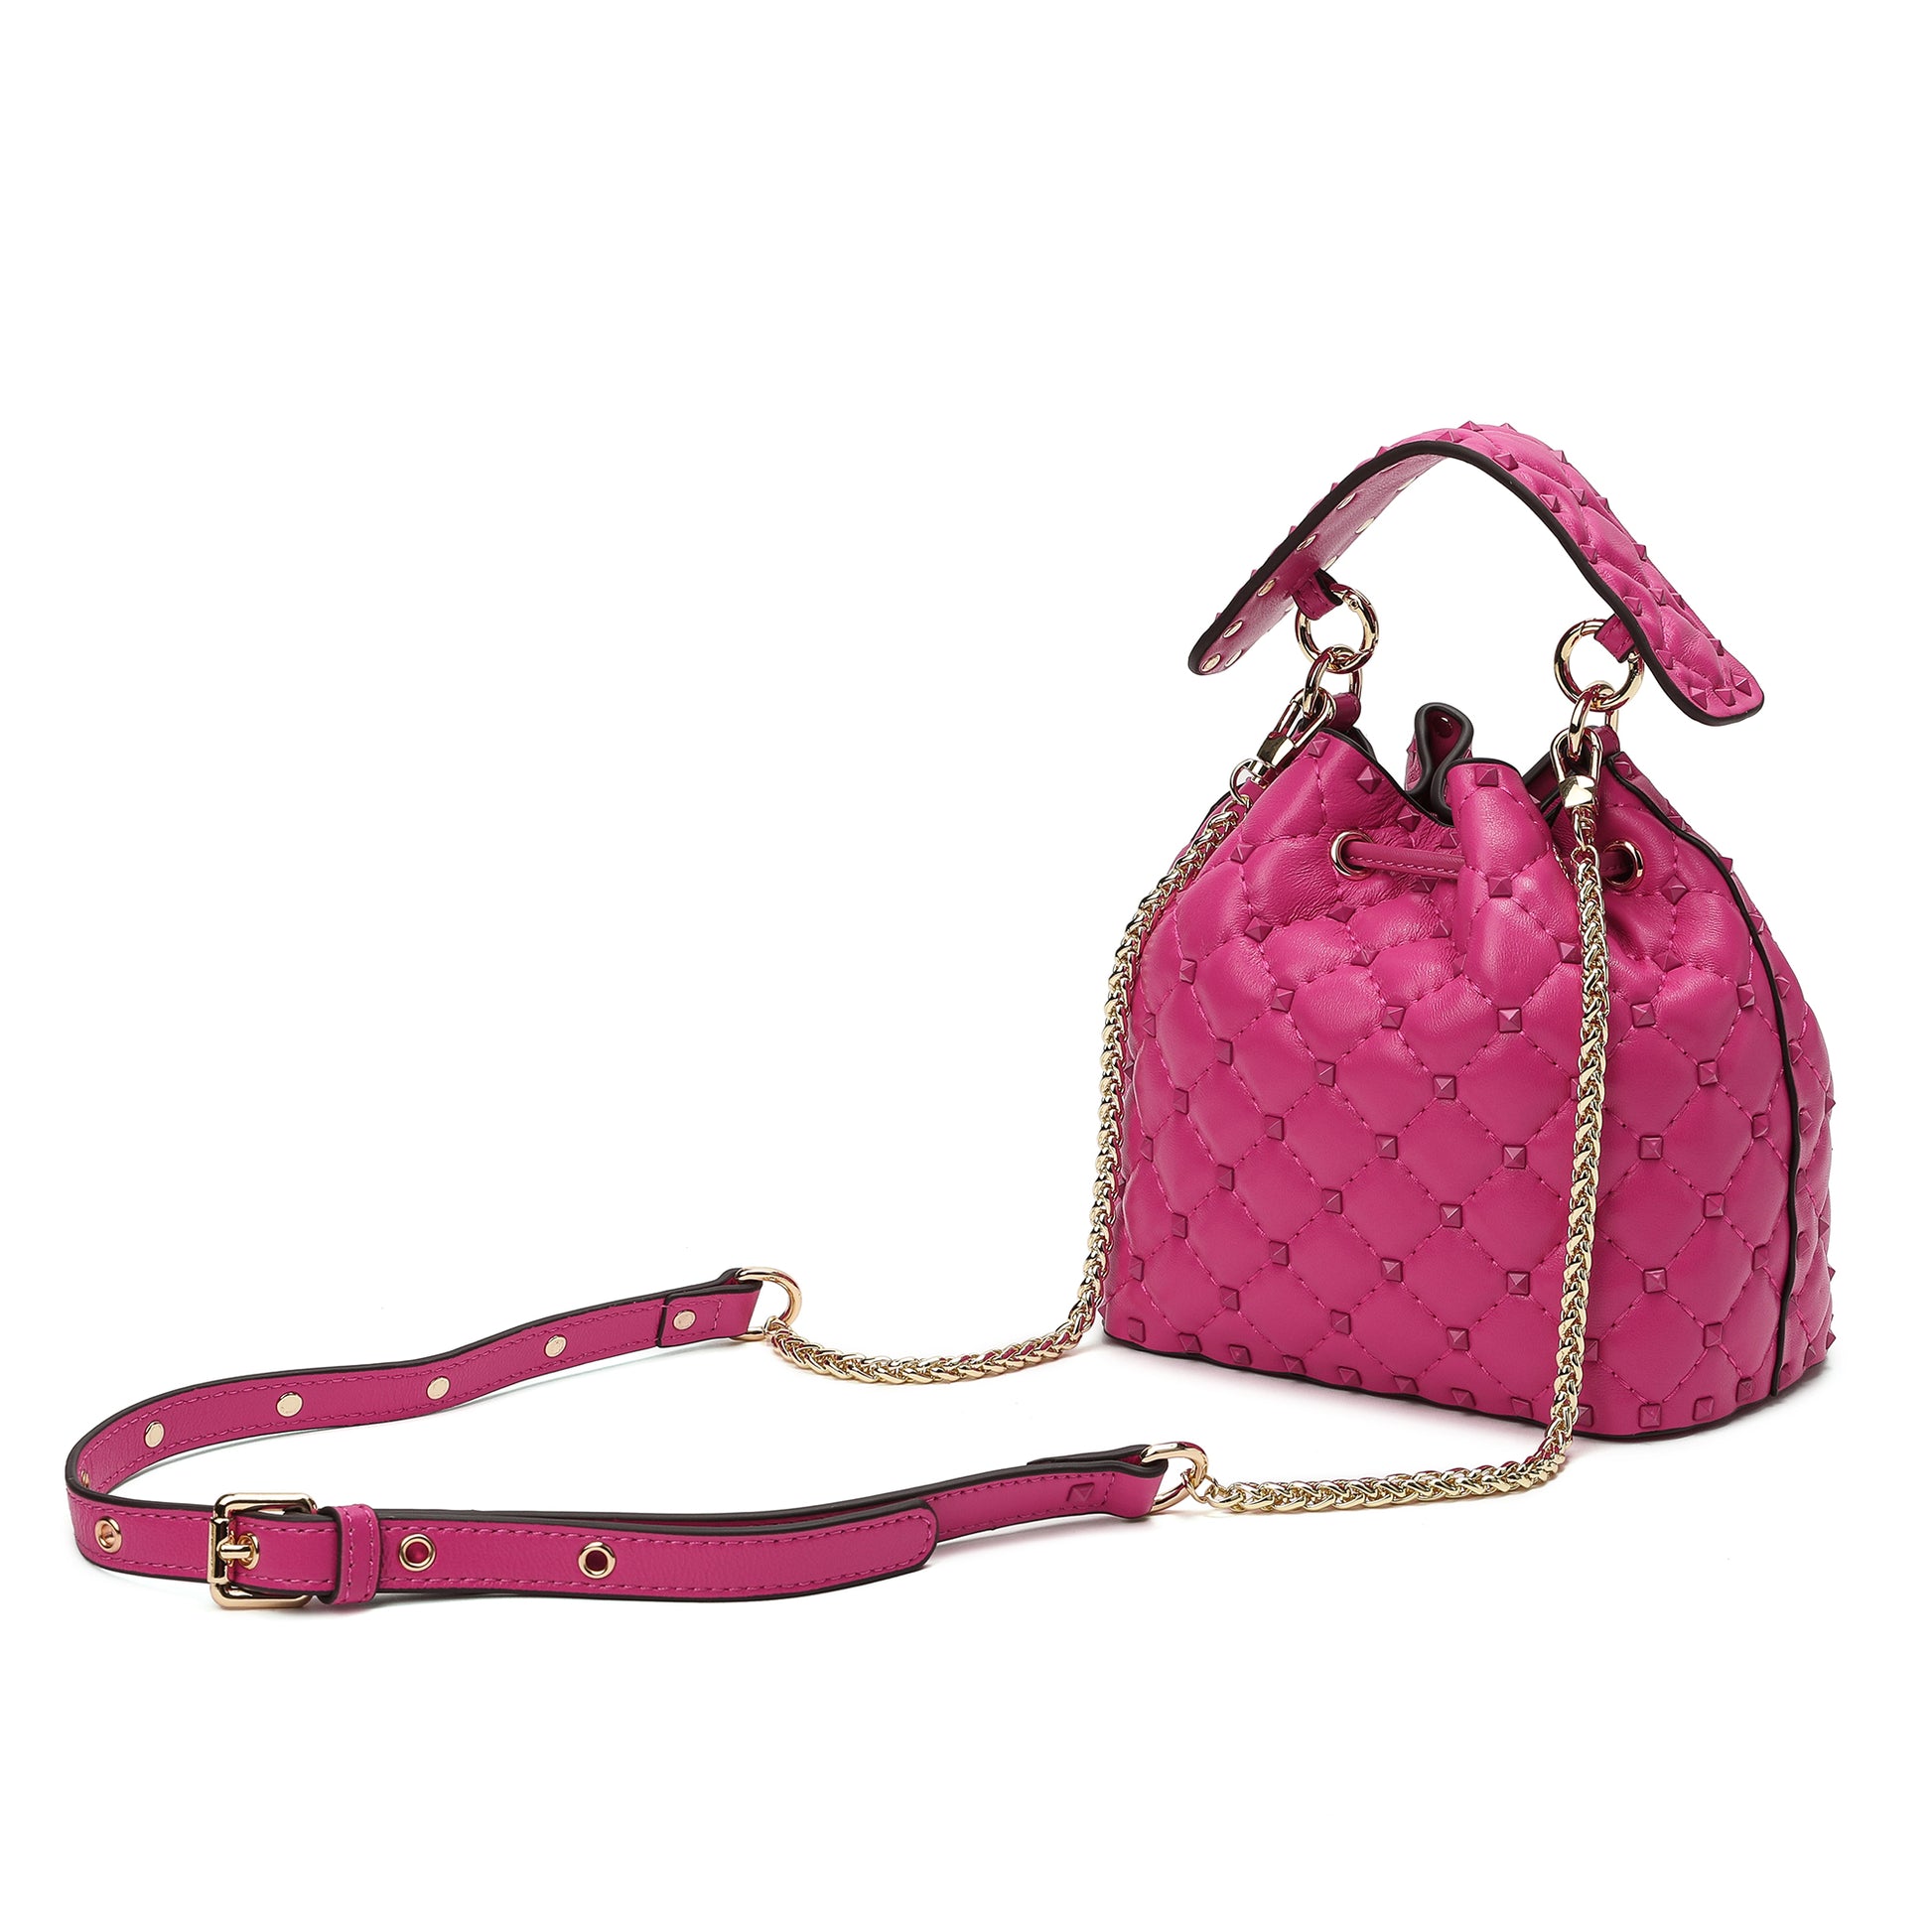 Quilted and Studded Sheepskin Leather Shoulder Bag – Tiffany